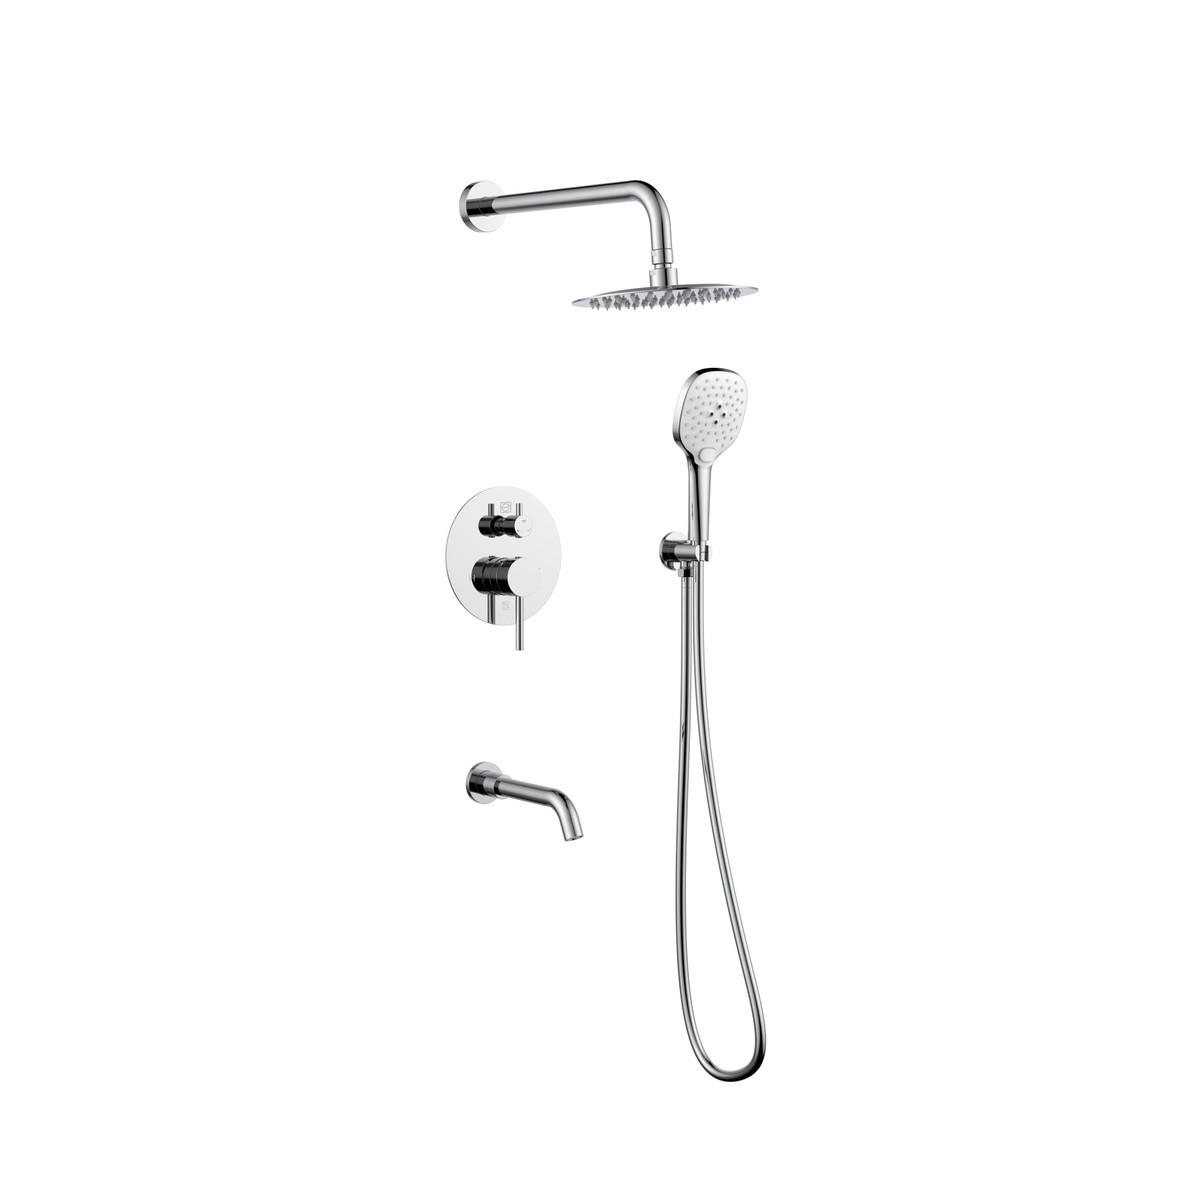 ELEGANT FURNITURE LIGHTING FAS-9002 GEORGE 8 INCH COMPLETE SHOWER SYSTEM WITH TUB SPOUT AND ROUGH-IN VALVE